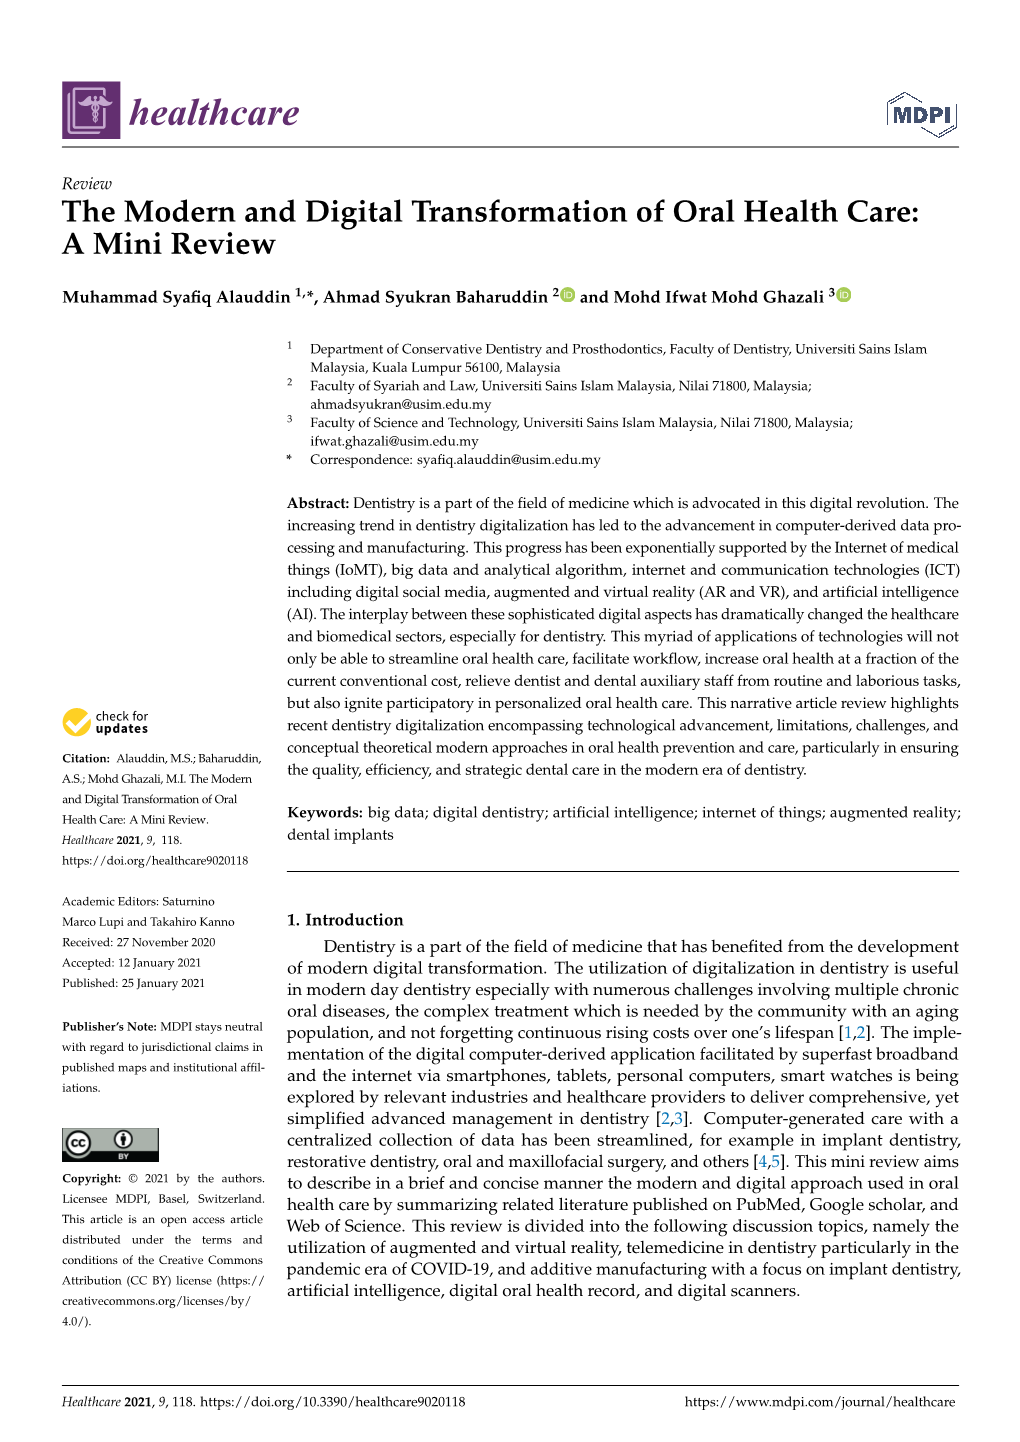 The Modern and Digital Transformation of Oral Health Care: a Mini Review